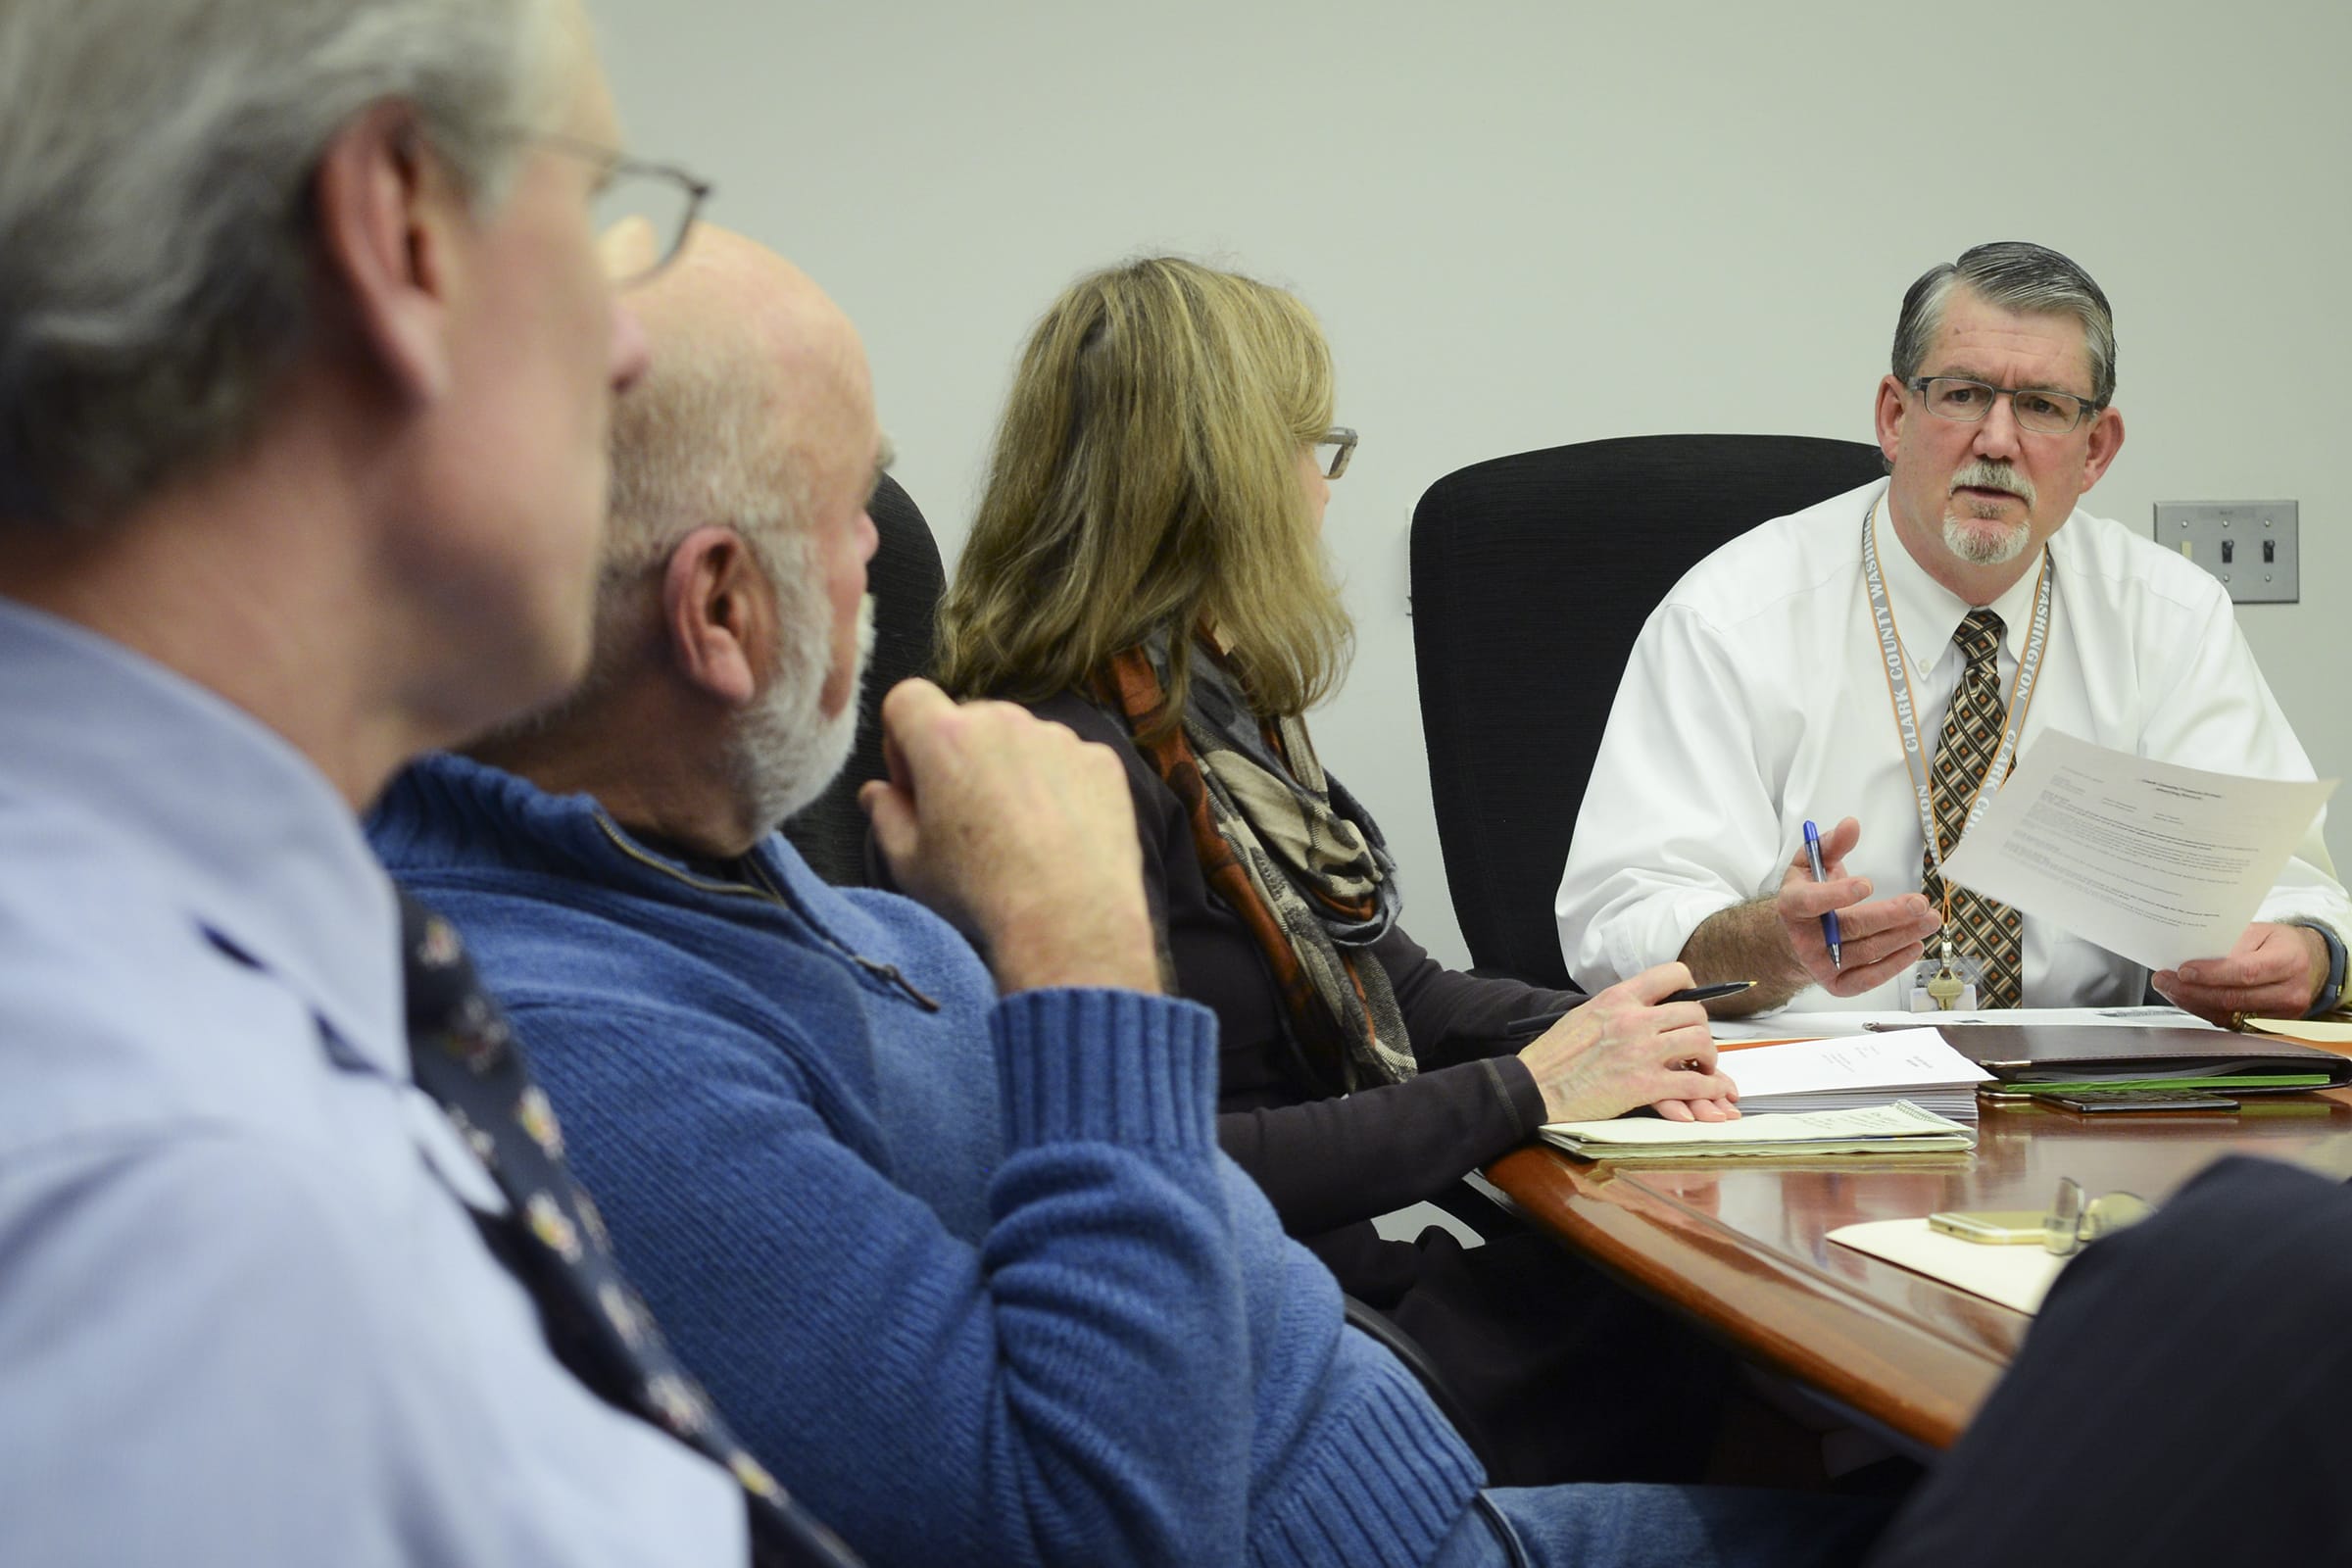 Clark County Administrator Mark McCauley, right, attends a finance committee meeting Tuesday afternoon with county employees, from left, Mark Gassaway, Bob Stevens and Laura Pedersen. Earlier Tuesday, McCauley accepted an offer from county commissioners to be acting county manager.